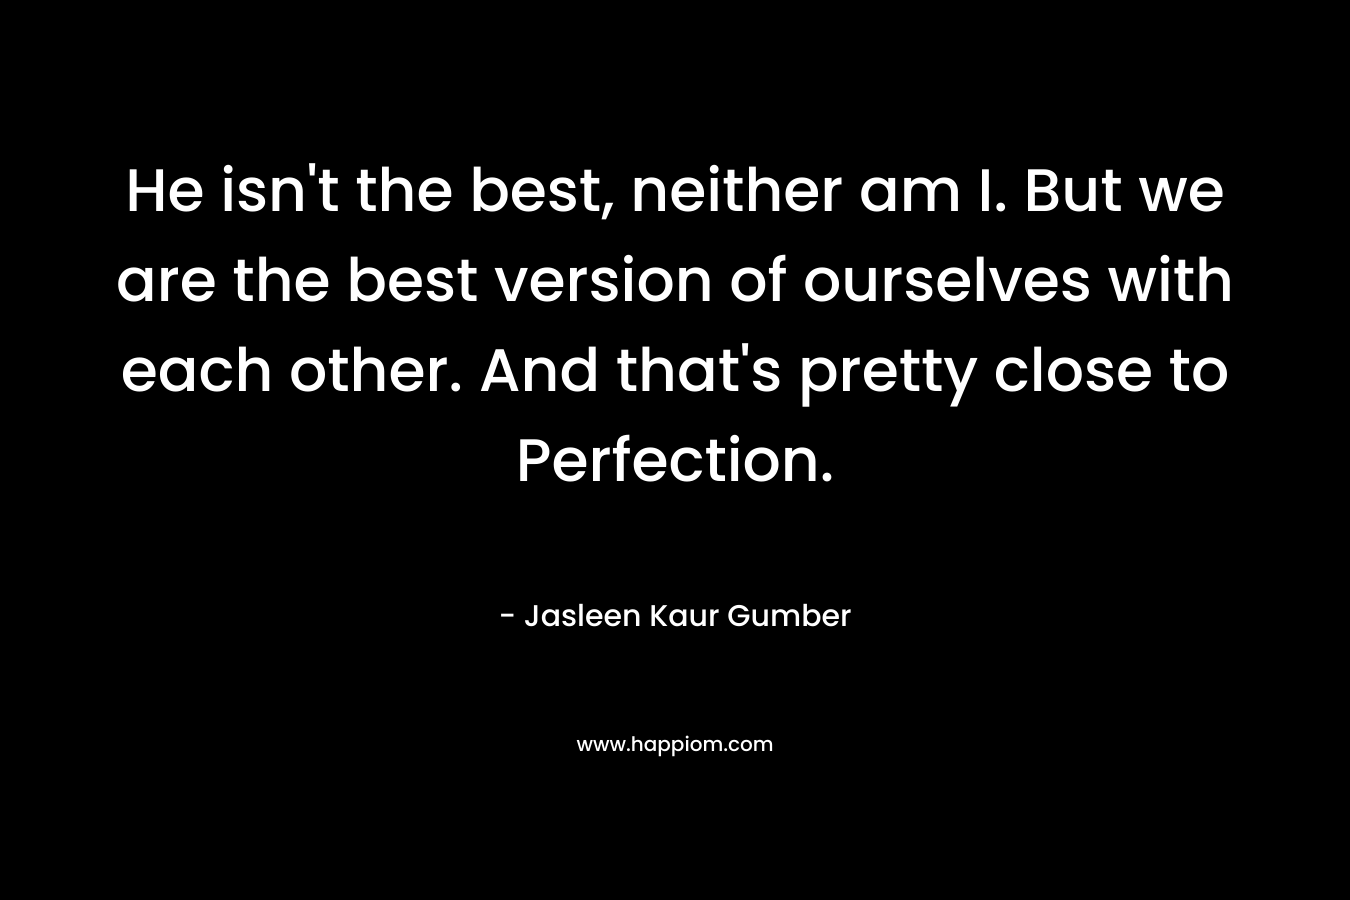 He isn't the best, neither am I. But we are the best version of ourselves with each other. And that's pretty close to Perfection.